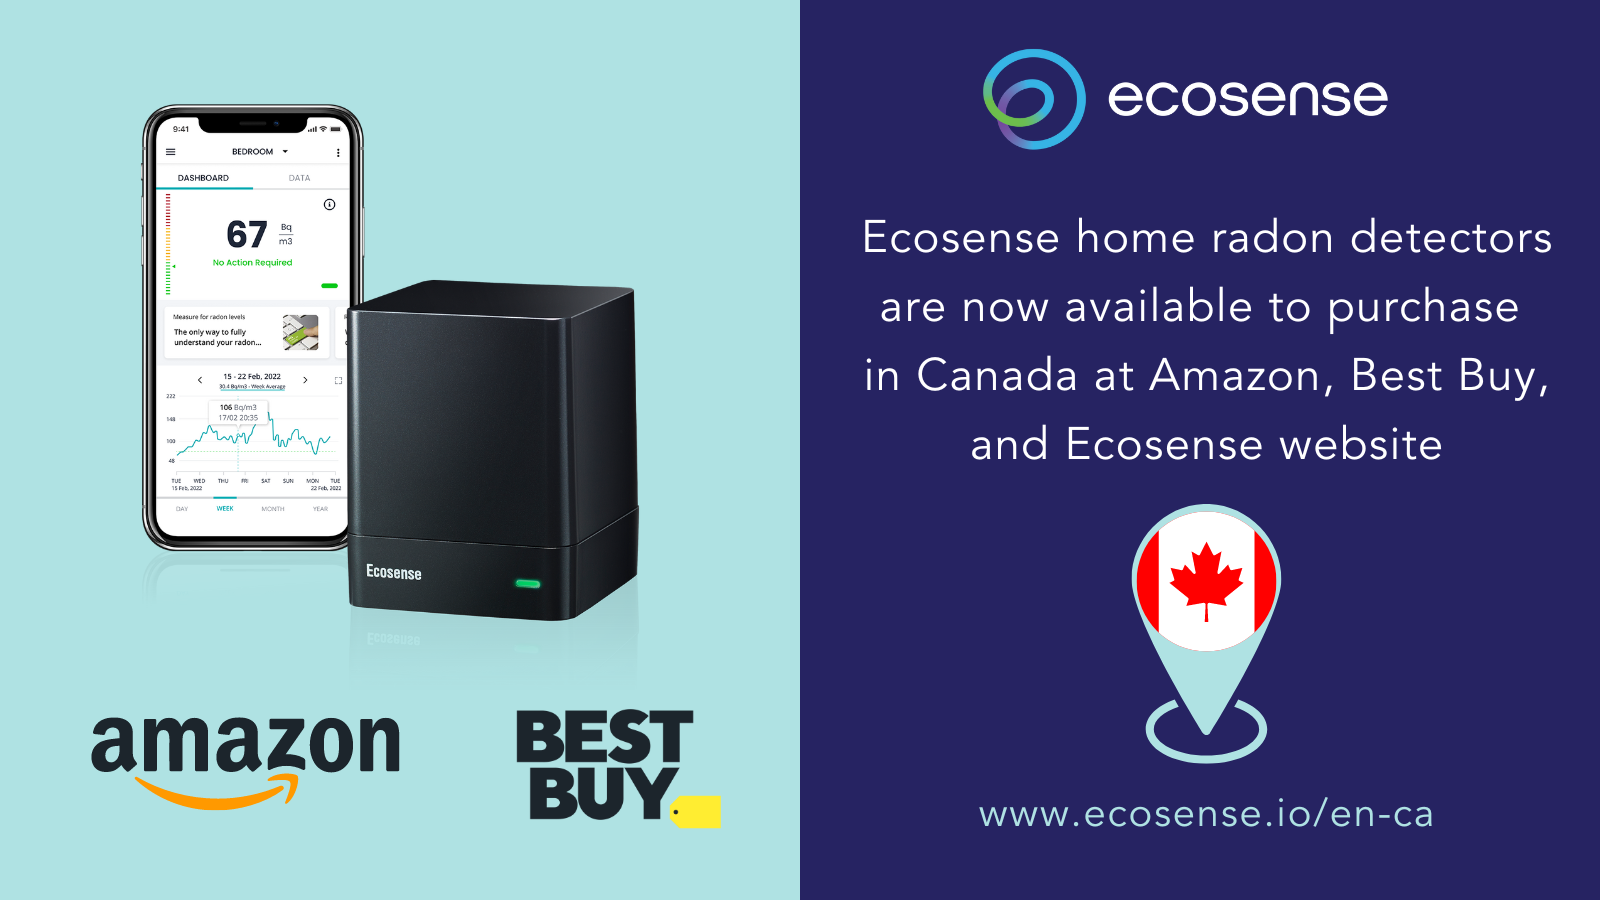 Ecosense’s Line of Innovative Radon Monitoring Devices is Now Available For Purchase in Canada through the company’s website, BestBuy and Amazon